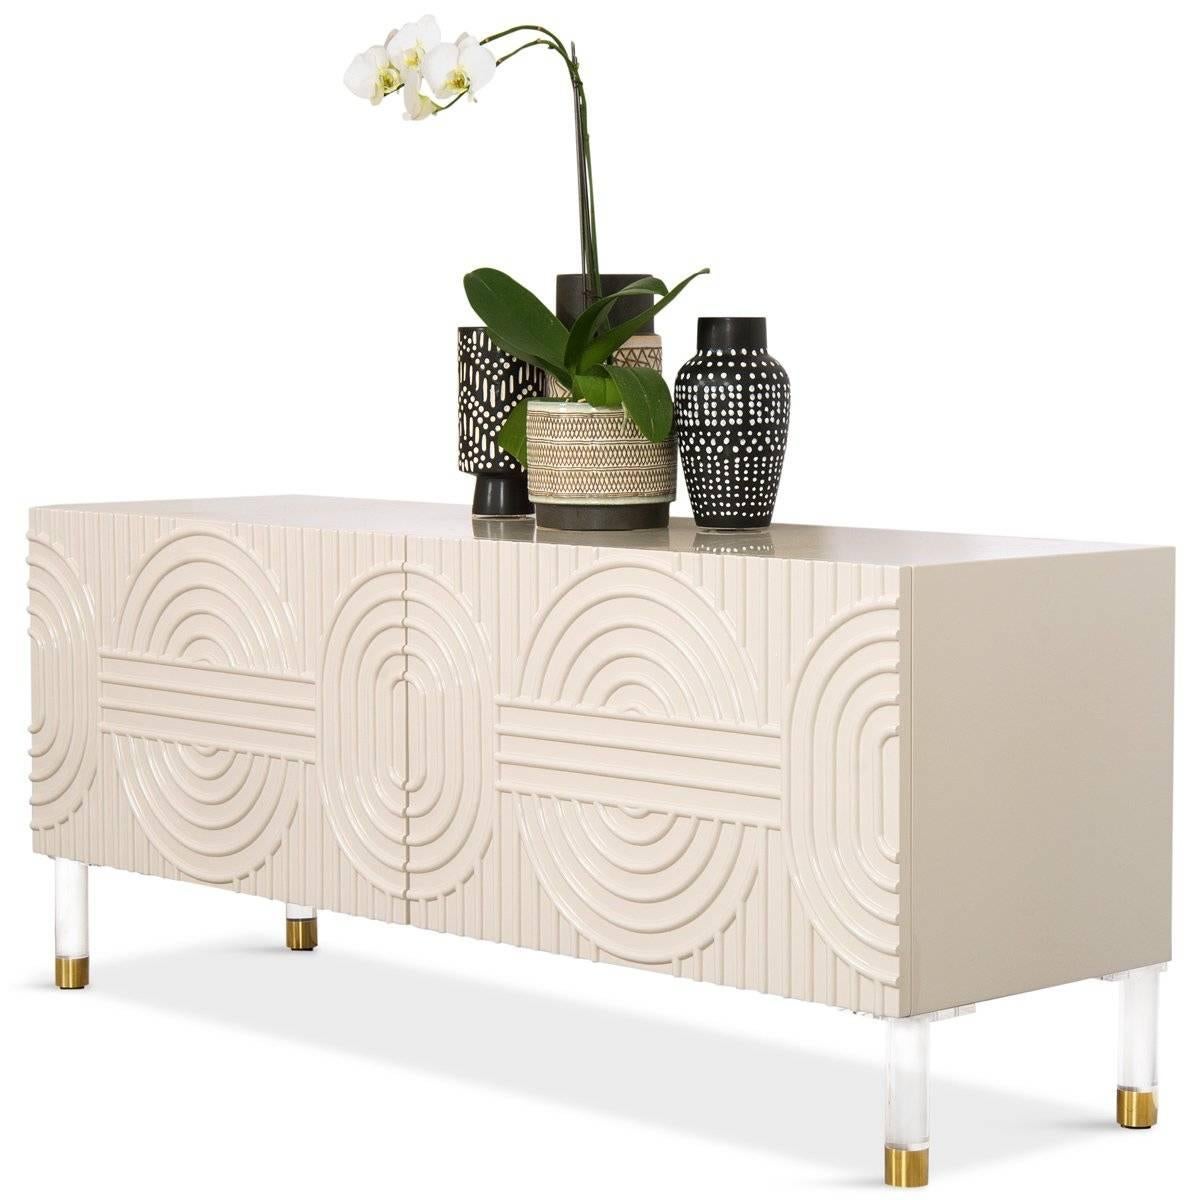 Introducing the Florence 2 Door Petite Credenza, featuring doors defined by bold concentric circles, ovals, and parallel lines. This credenza is both fresh and timeless in its design. Round lucite and brass legs complete the look. Its smaller size